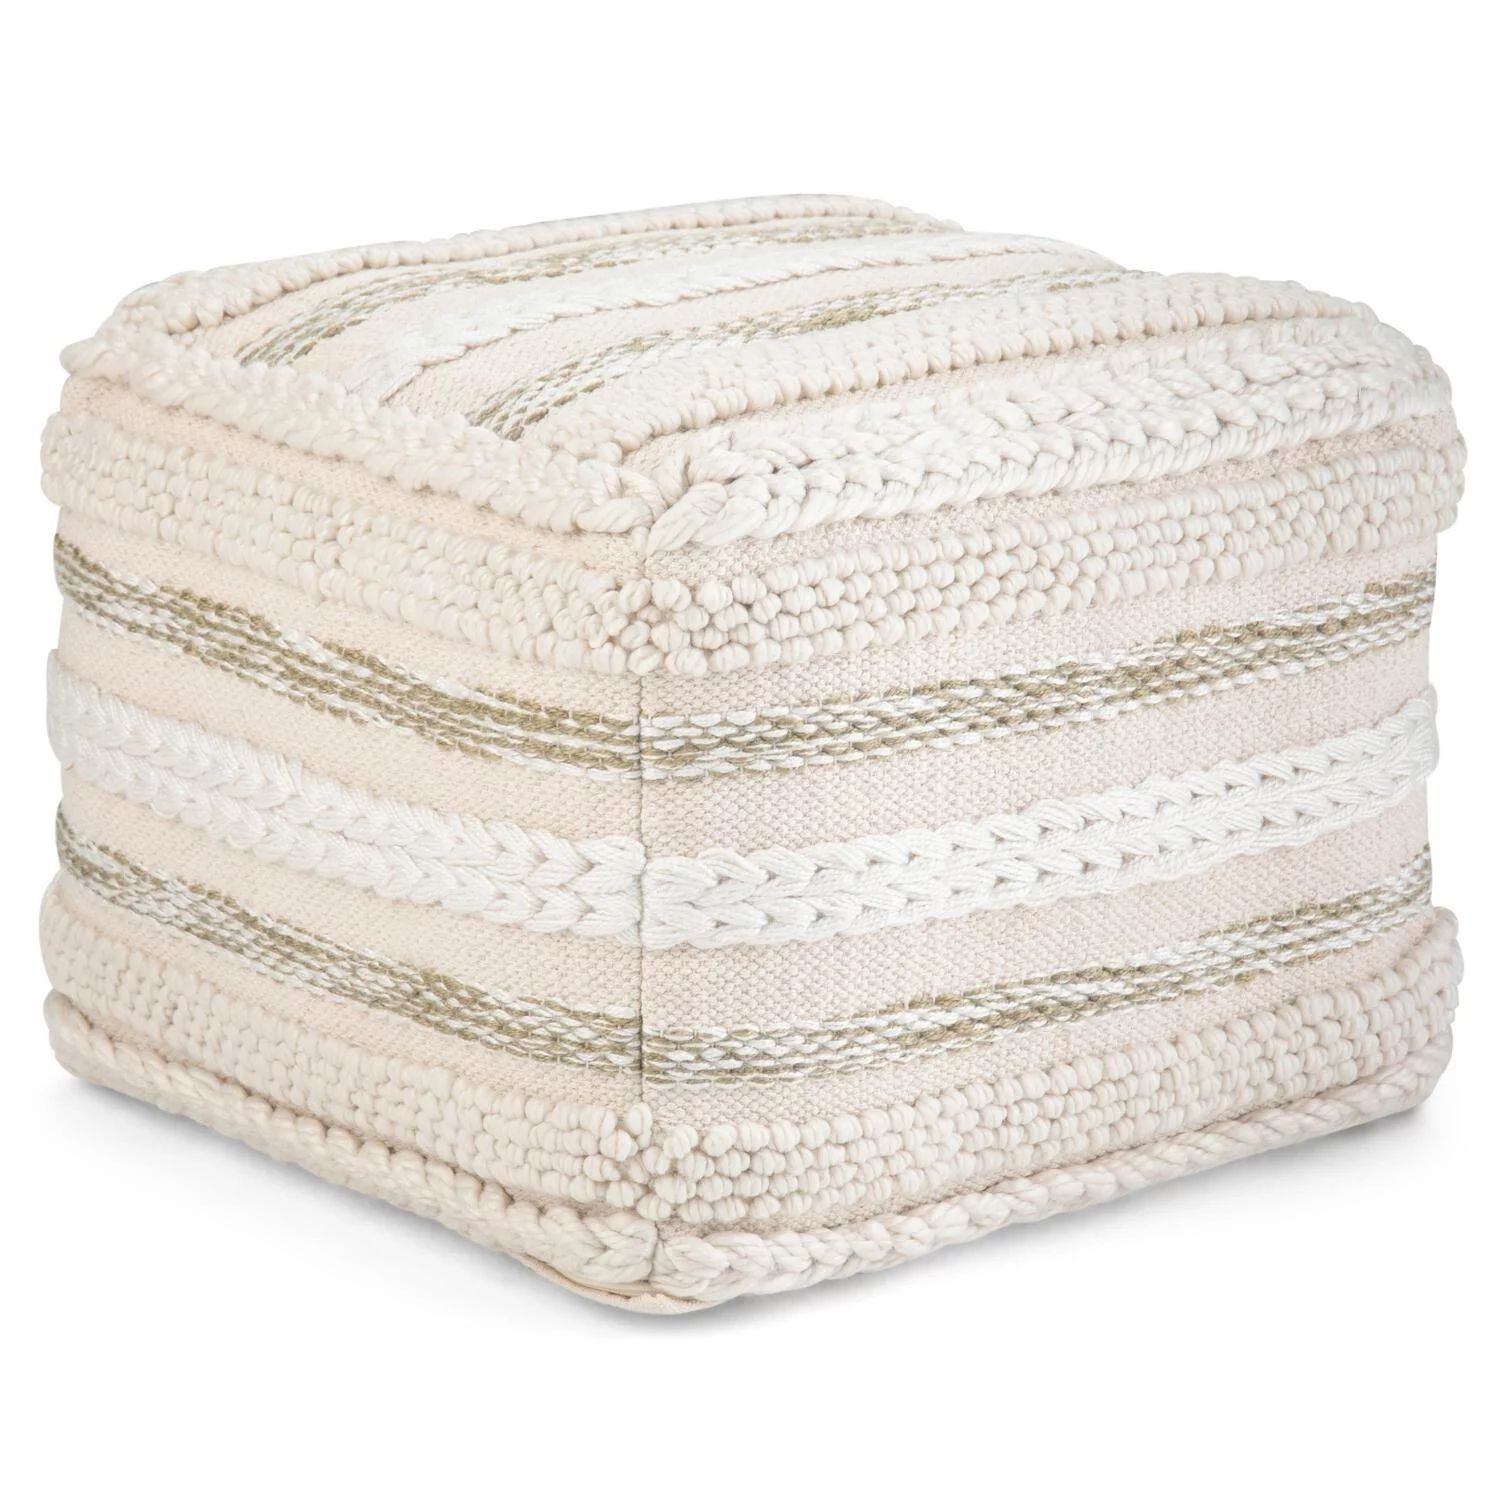 Sommer Boho Square Pouf in Natural Handloom Woven Pattern | Walmart (US)